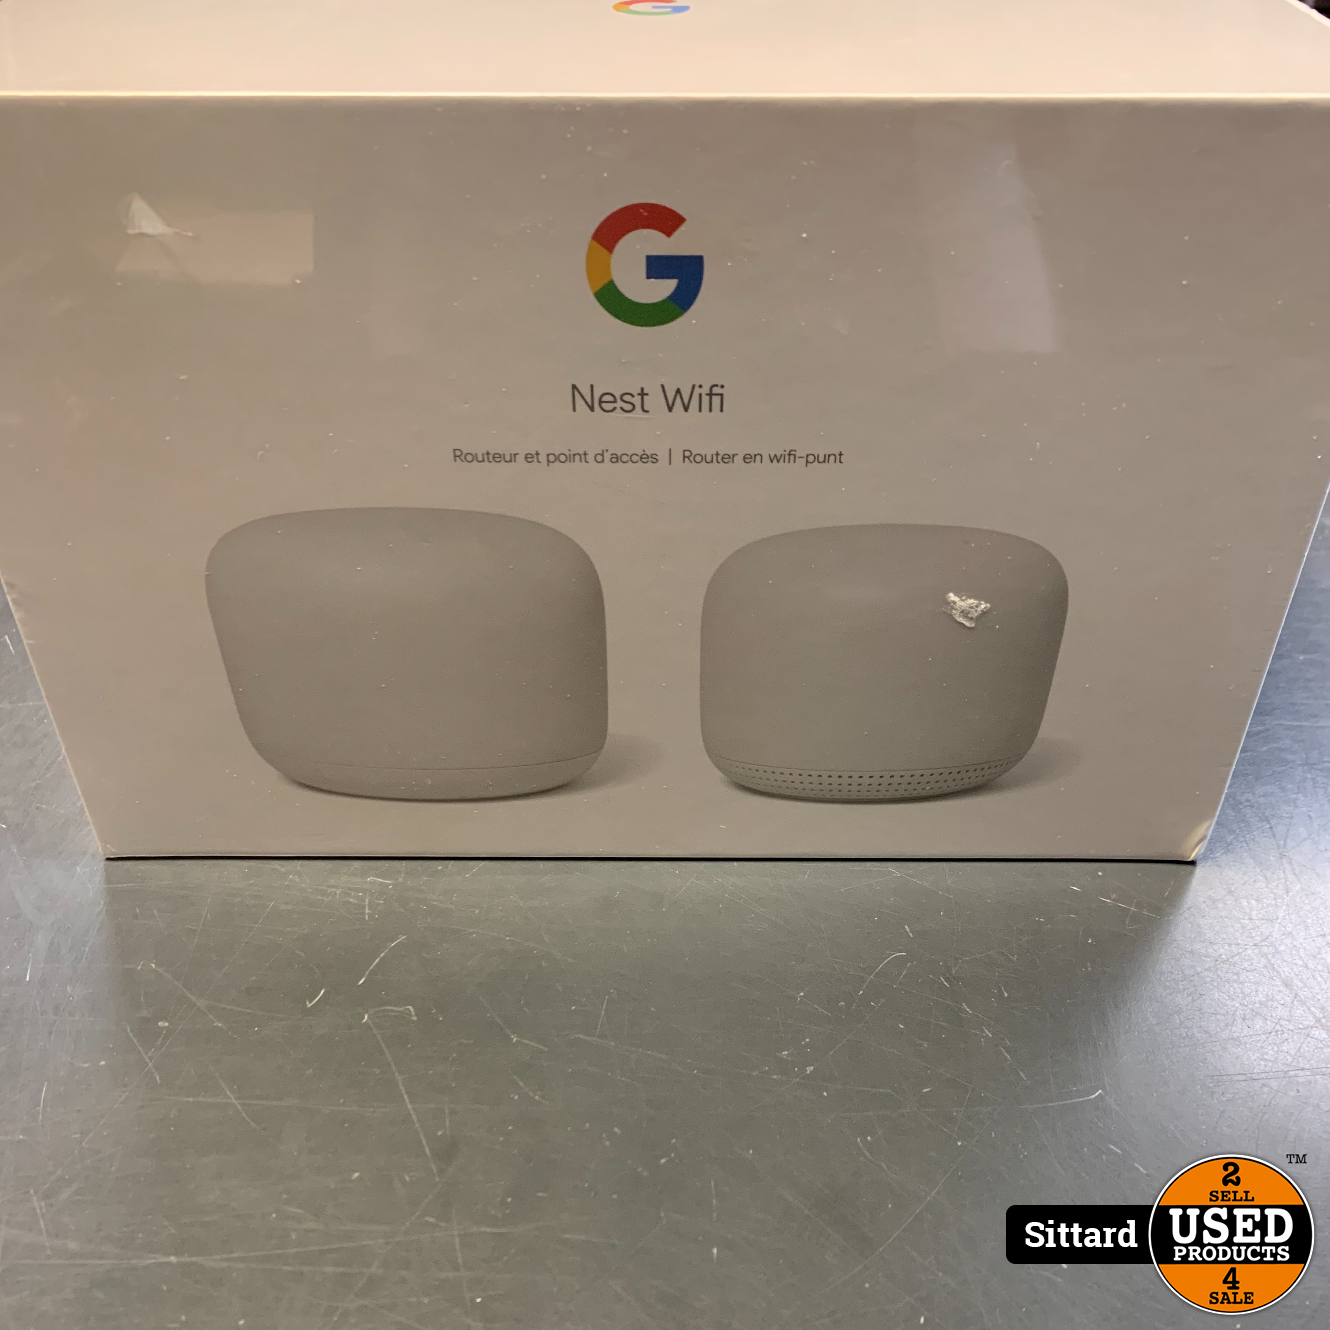 Google Nest WiFi router + WiFi point nieuw in seal , nwpr. 249,- Euro Used Products Sittard